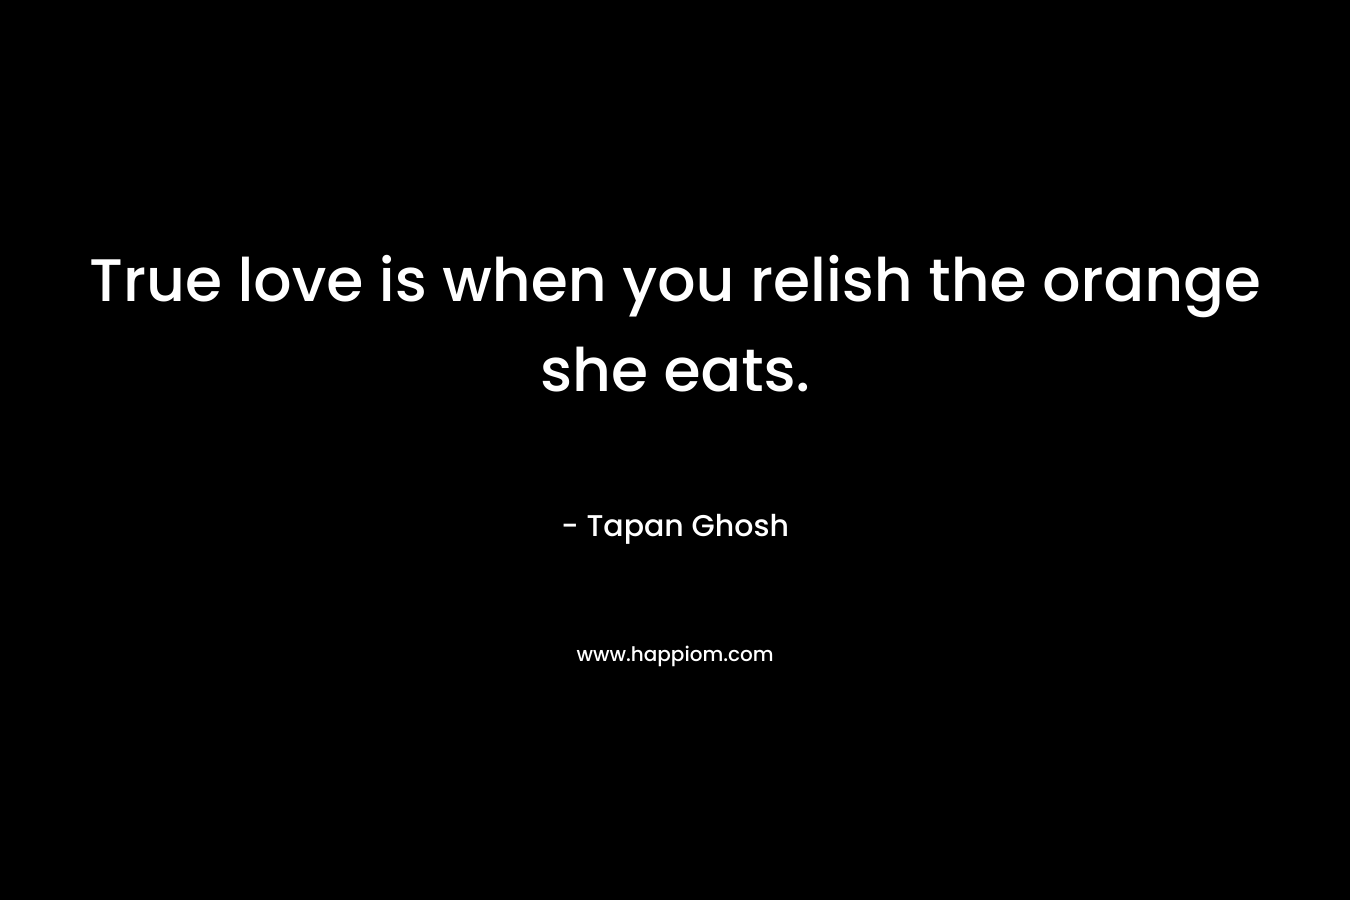 True love is when you relish the orange she eats.